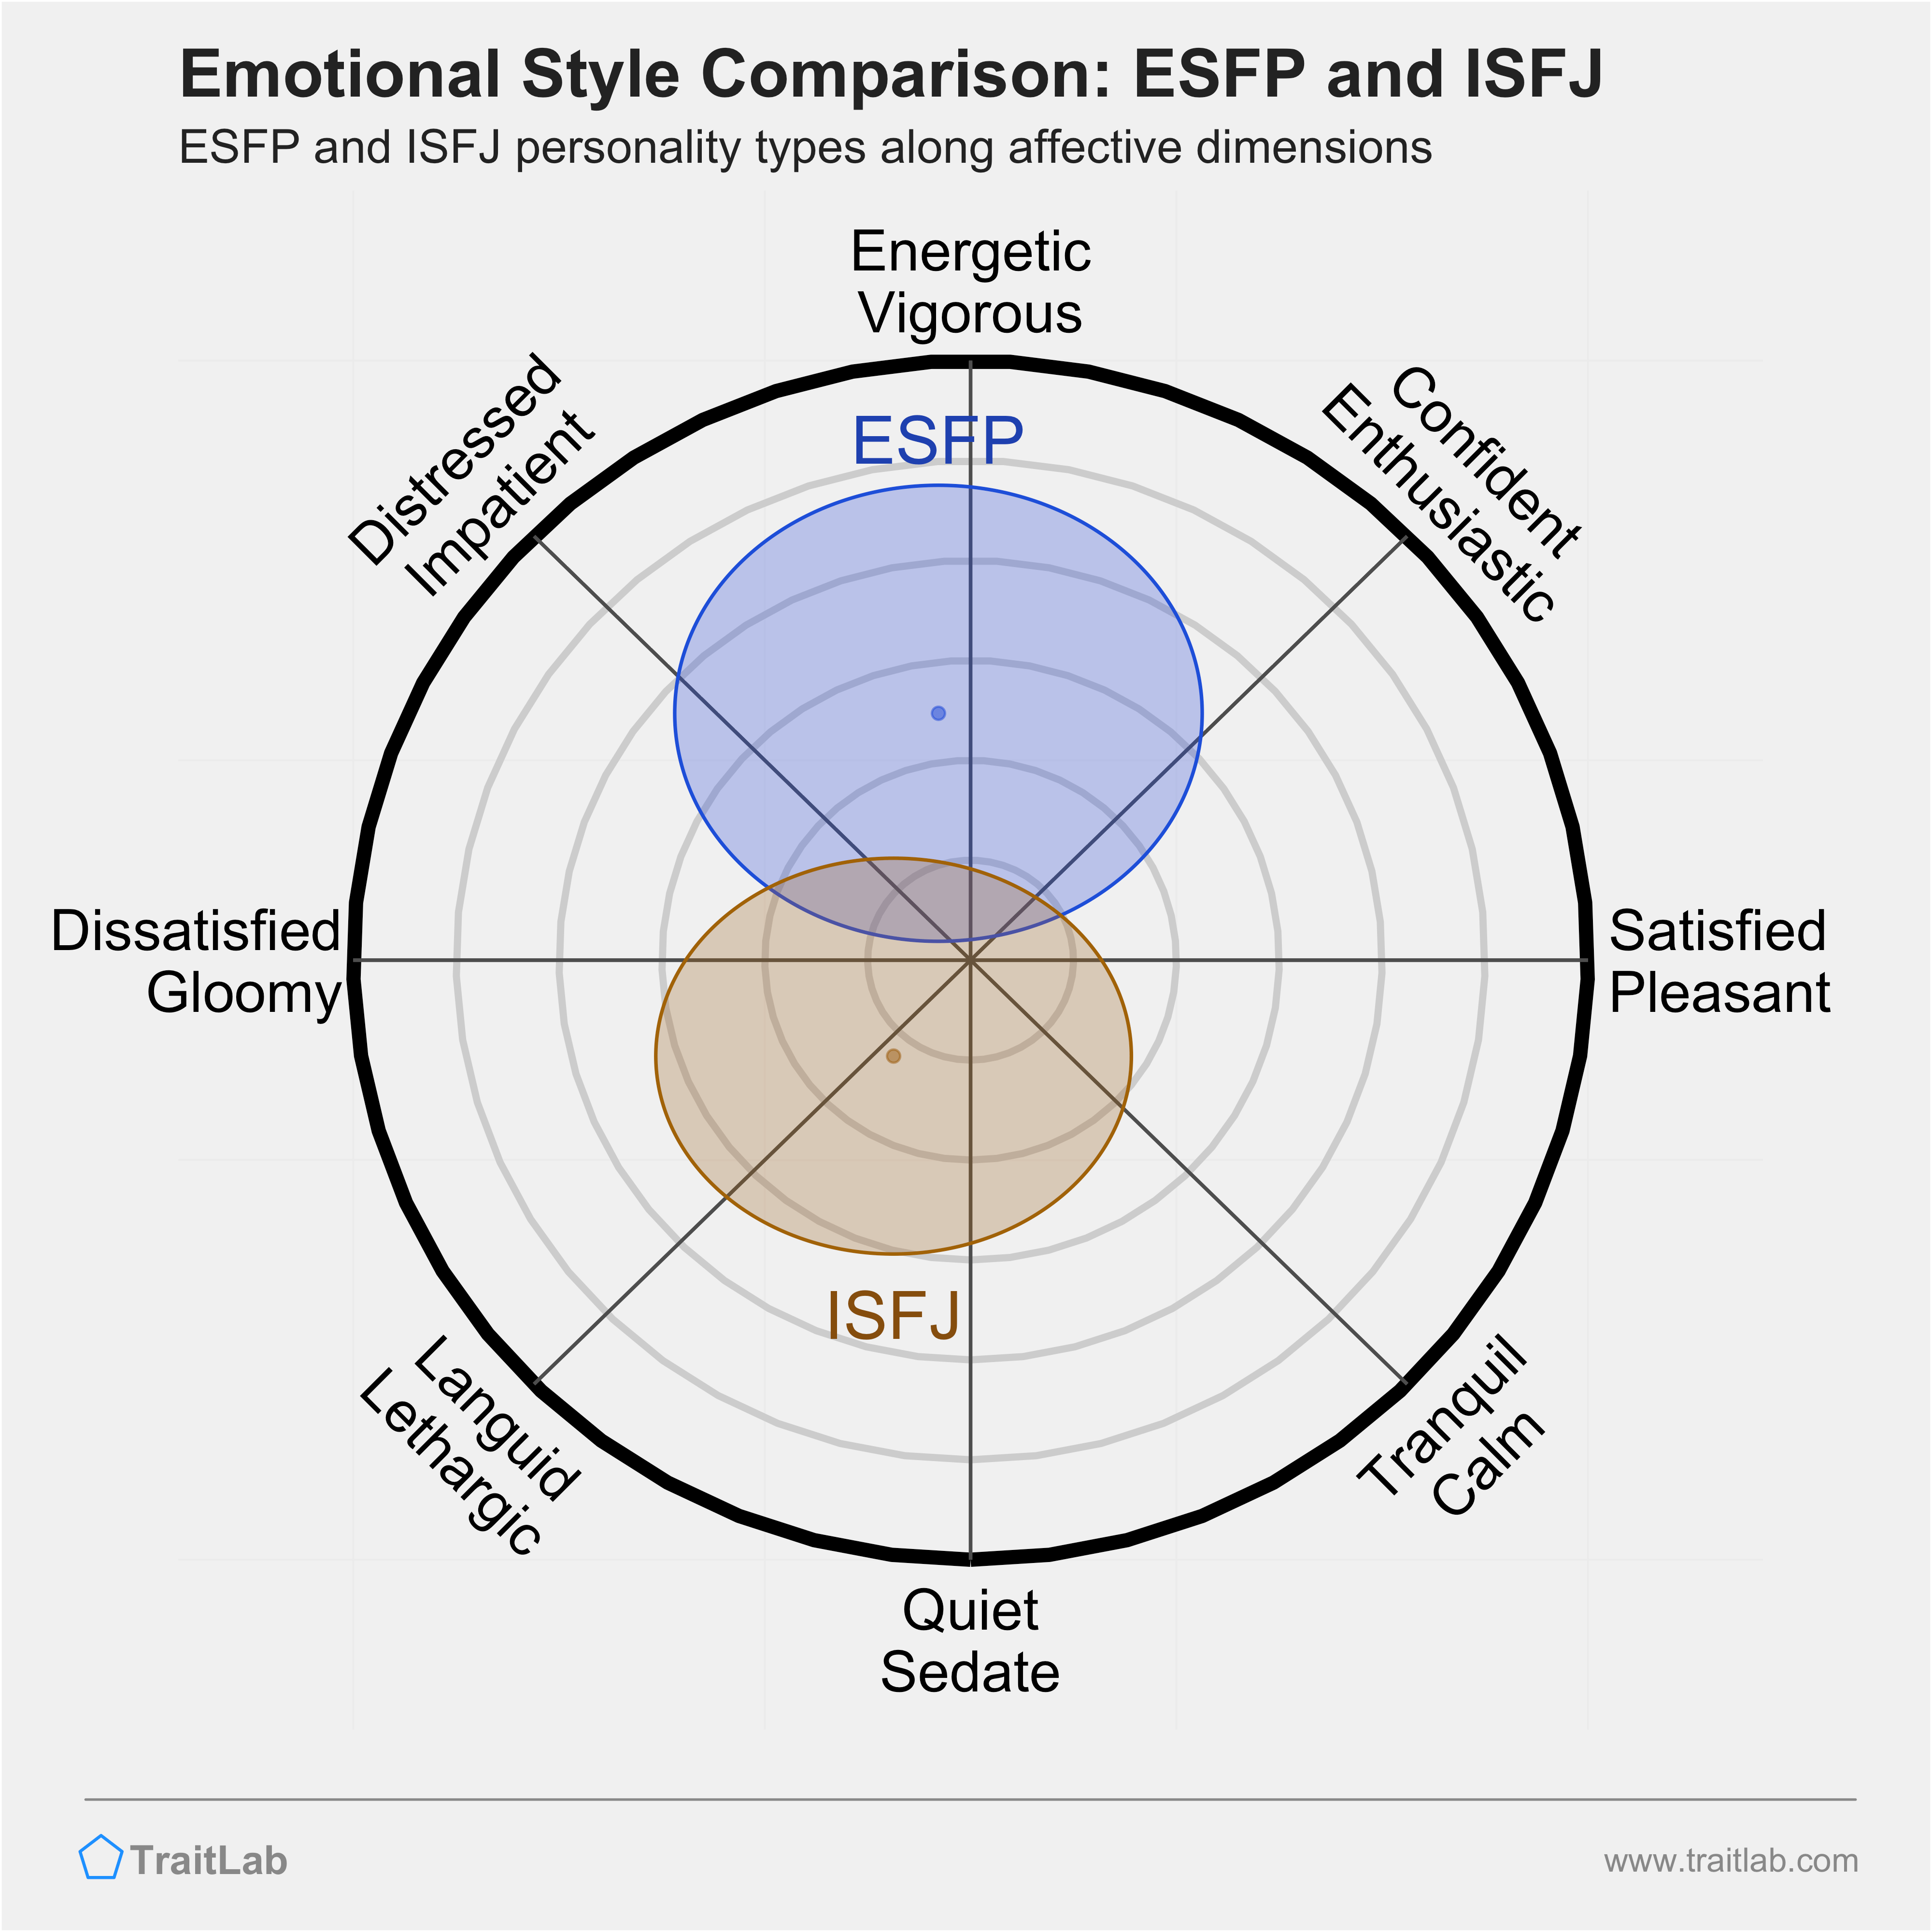 ESFP and ISFJ comparison across emotional (affective) dimensions